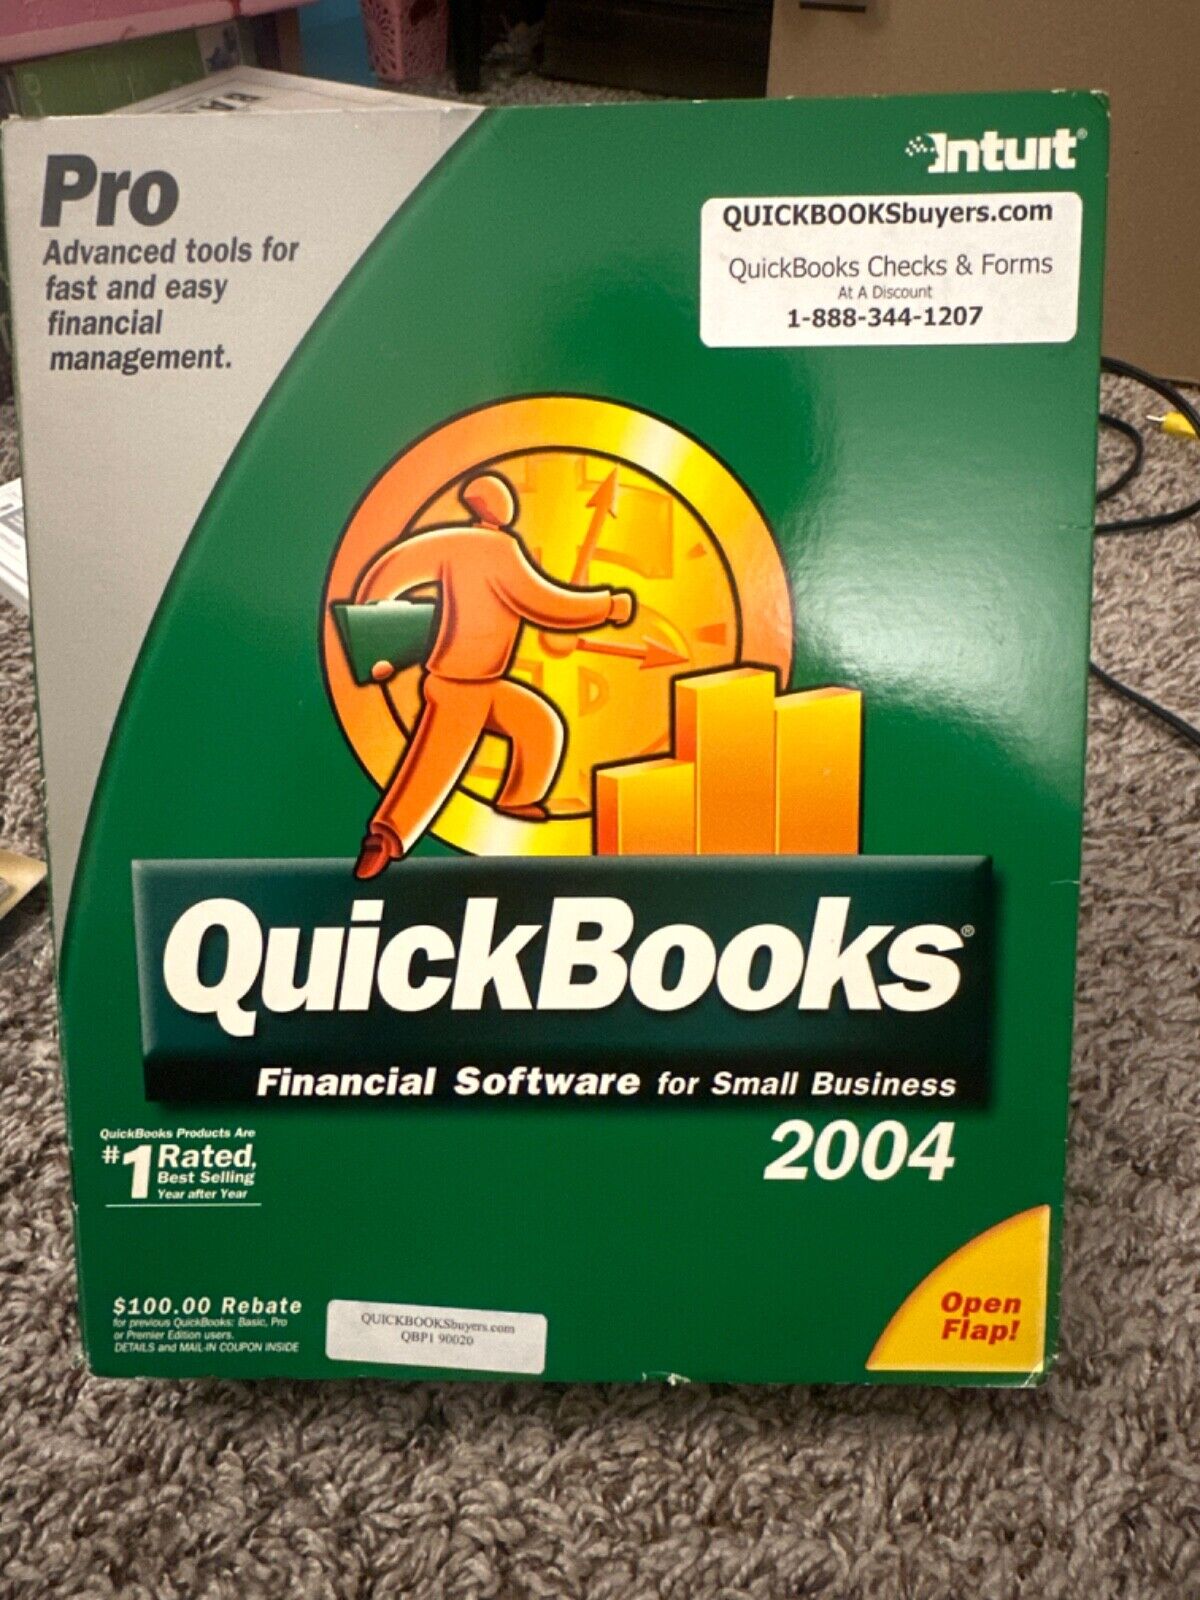 Intuit QuickBooks Pro 2004 With License For Windows 98/ME/2000/XP